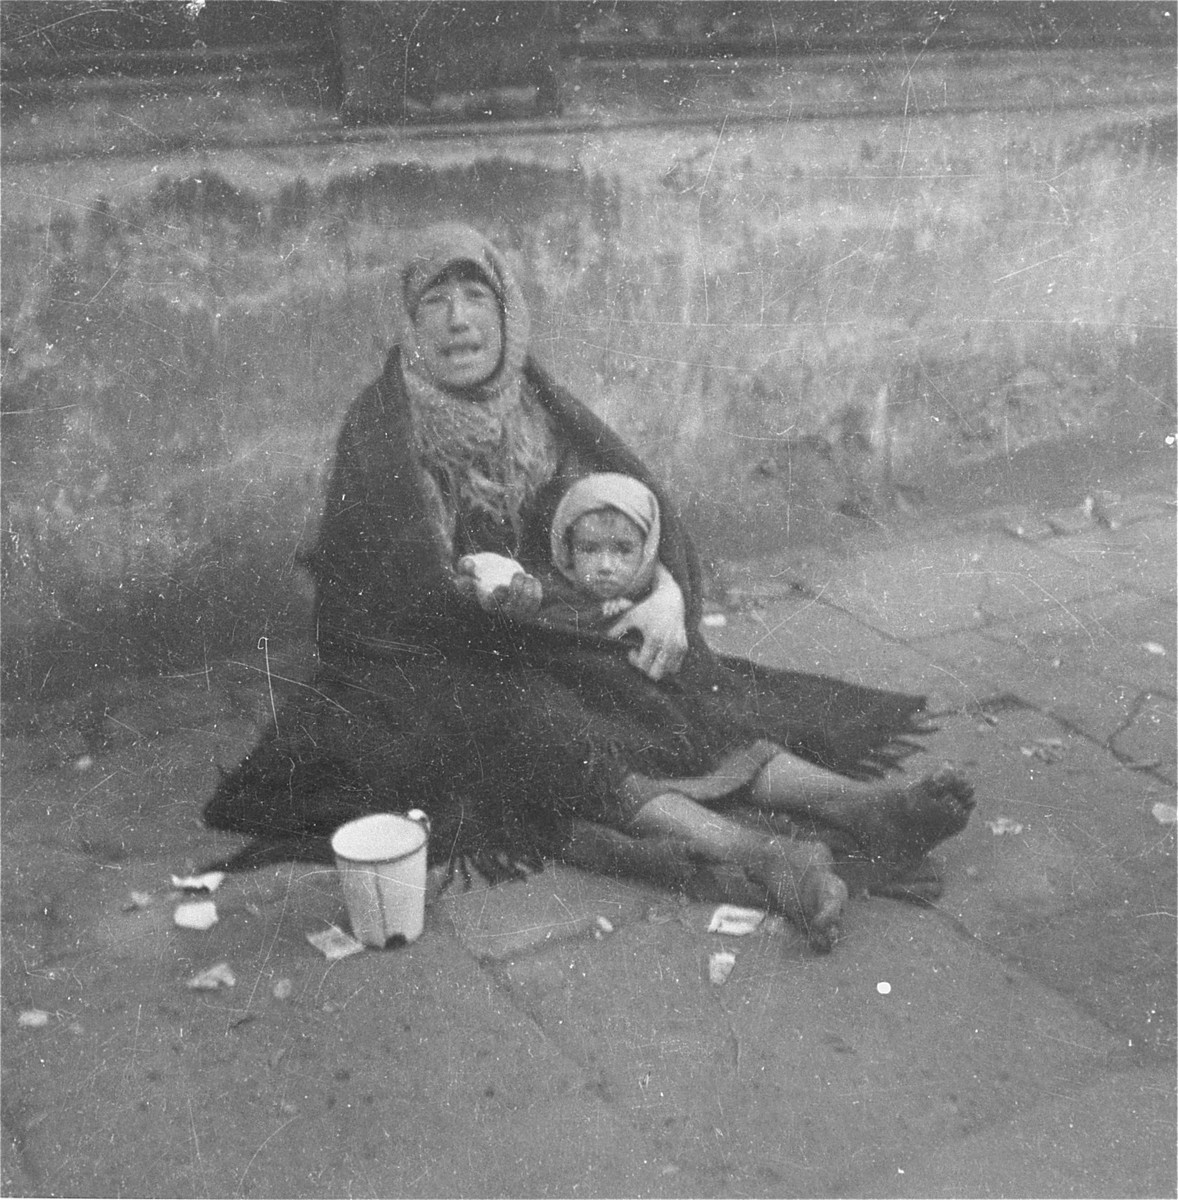 A destitute mother holding her child begs on a street in the Warsaw ghetto.  

Joest's original caption reads: "With a gesture of her bandaged hand this woman wanted to show me that her child had nothing to eat.  She wore a headscarf wrapped in a blanket but had no shoes."